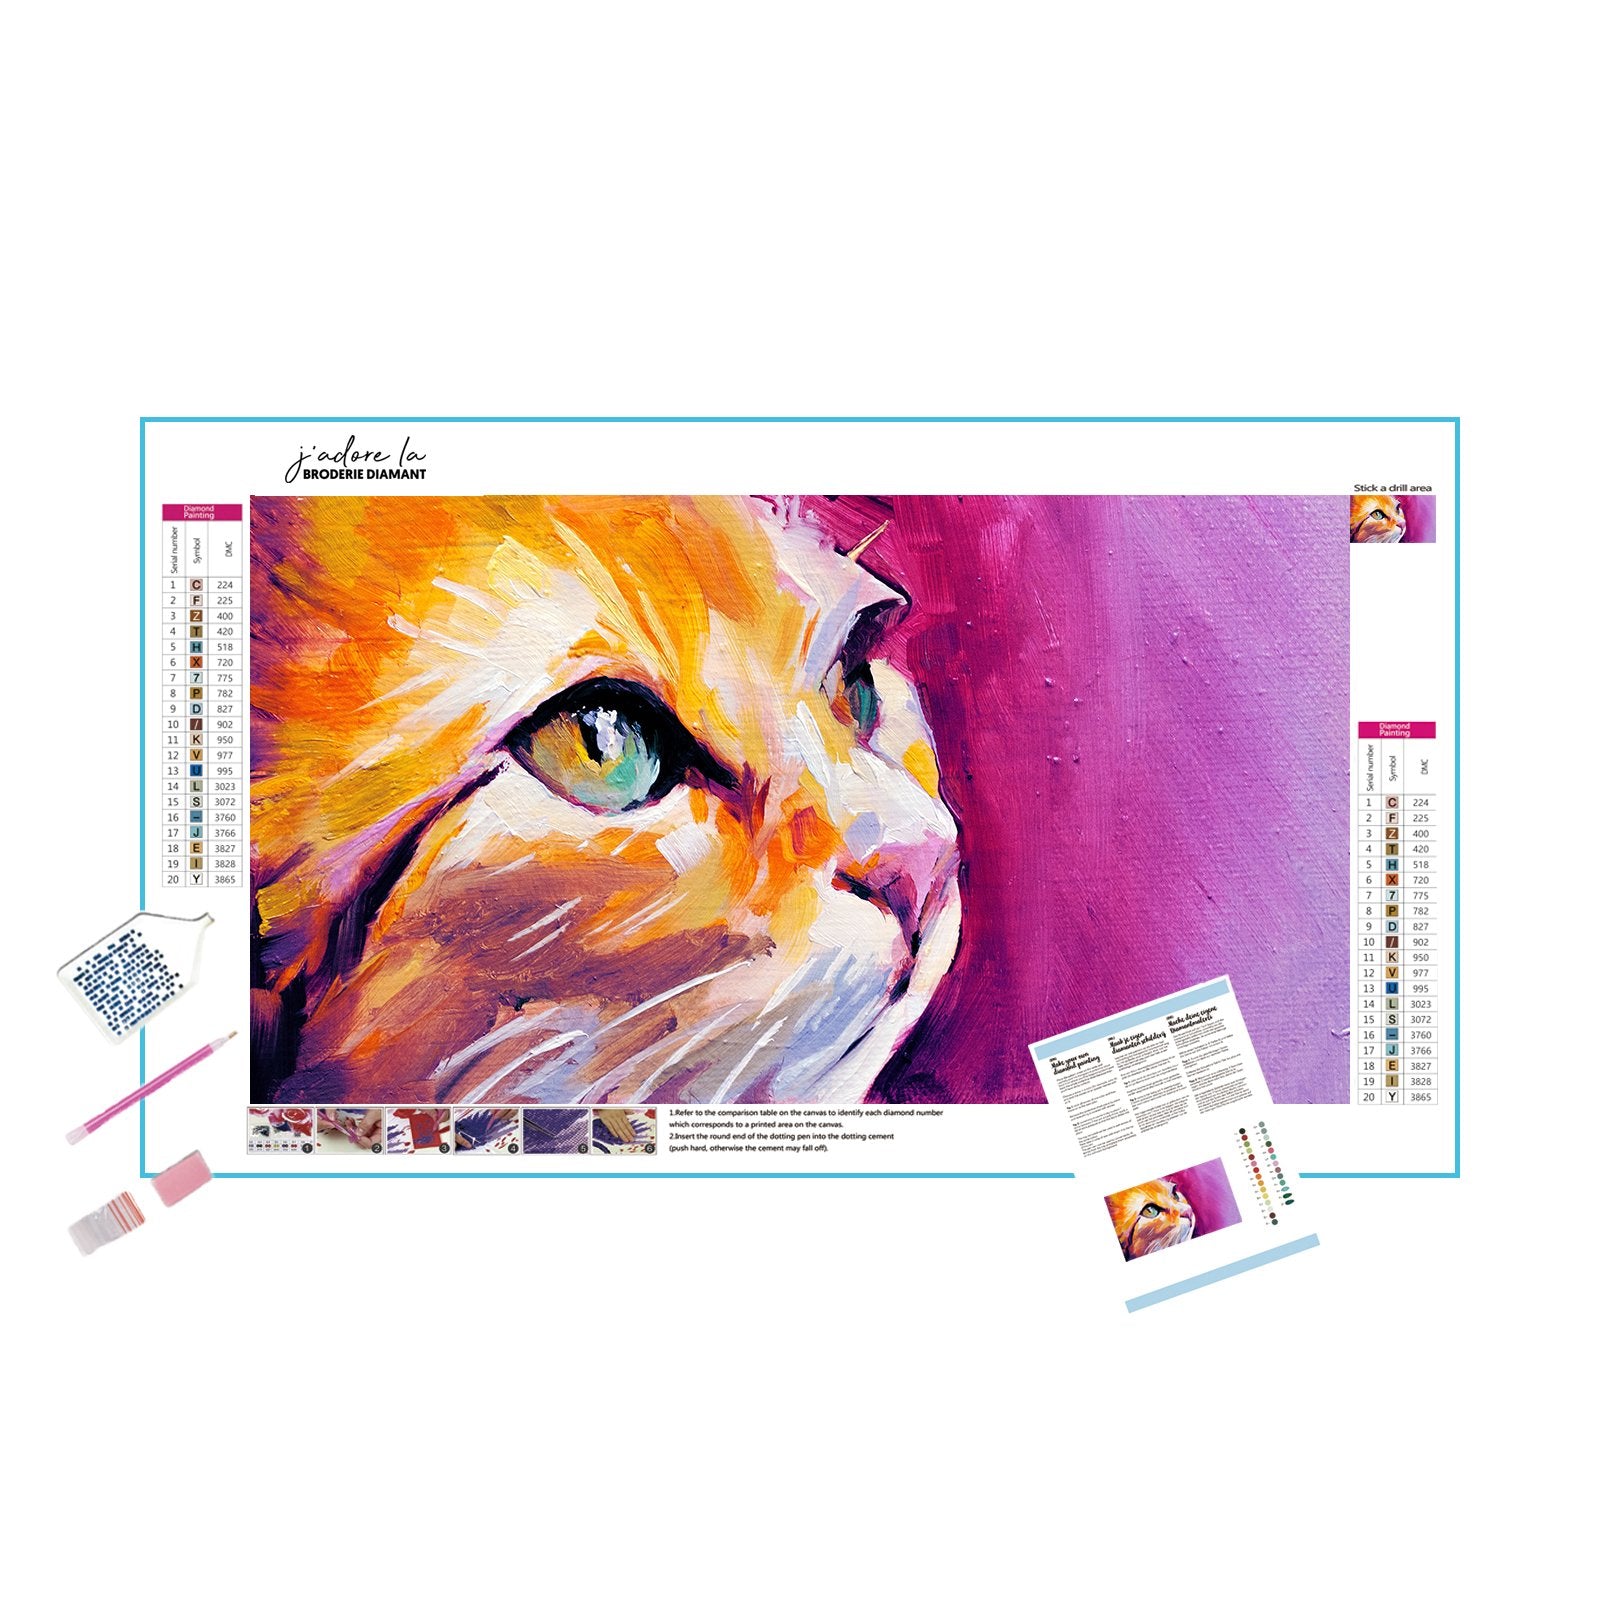 A cat's portrait, painted with depth and affection, capturing the essence of its character. Cat'S Painting - Diamondartlove